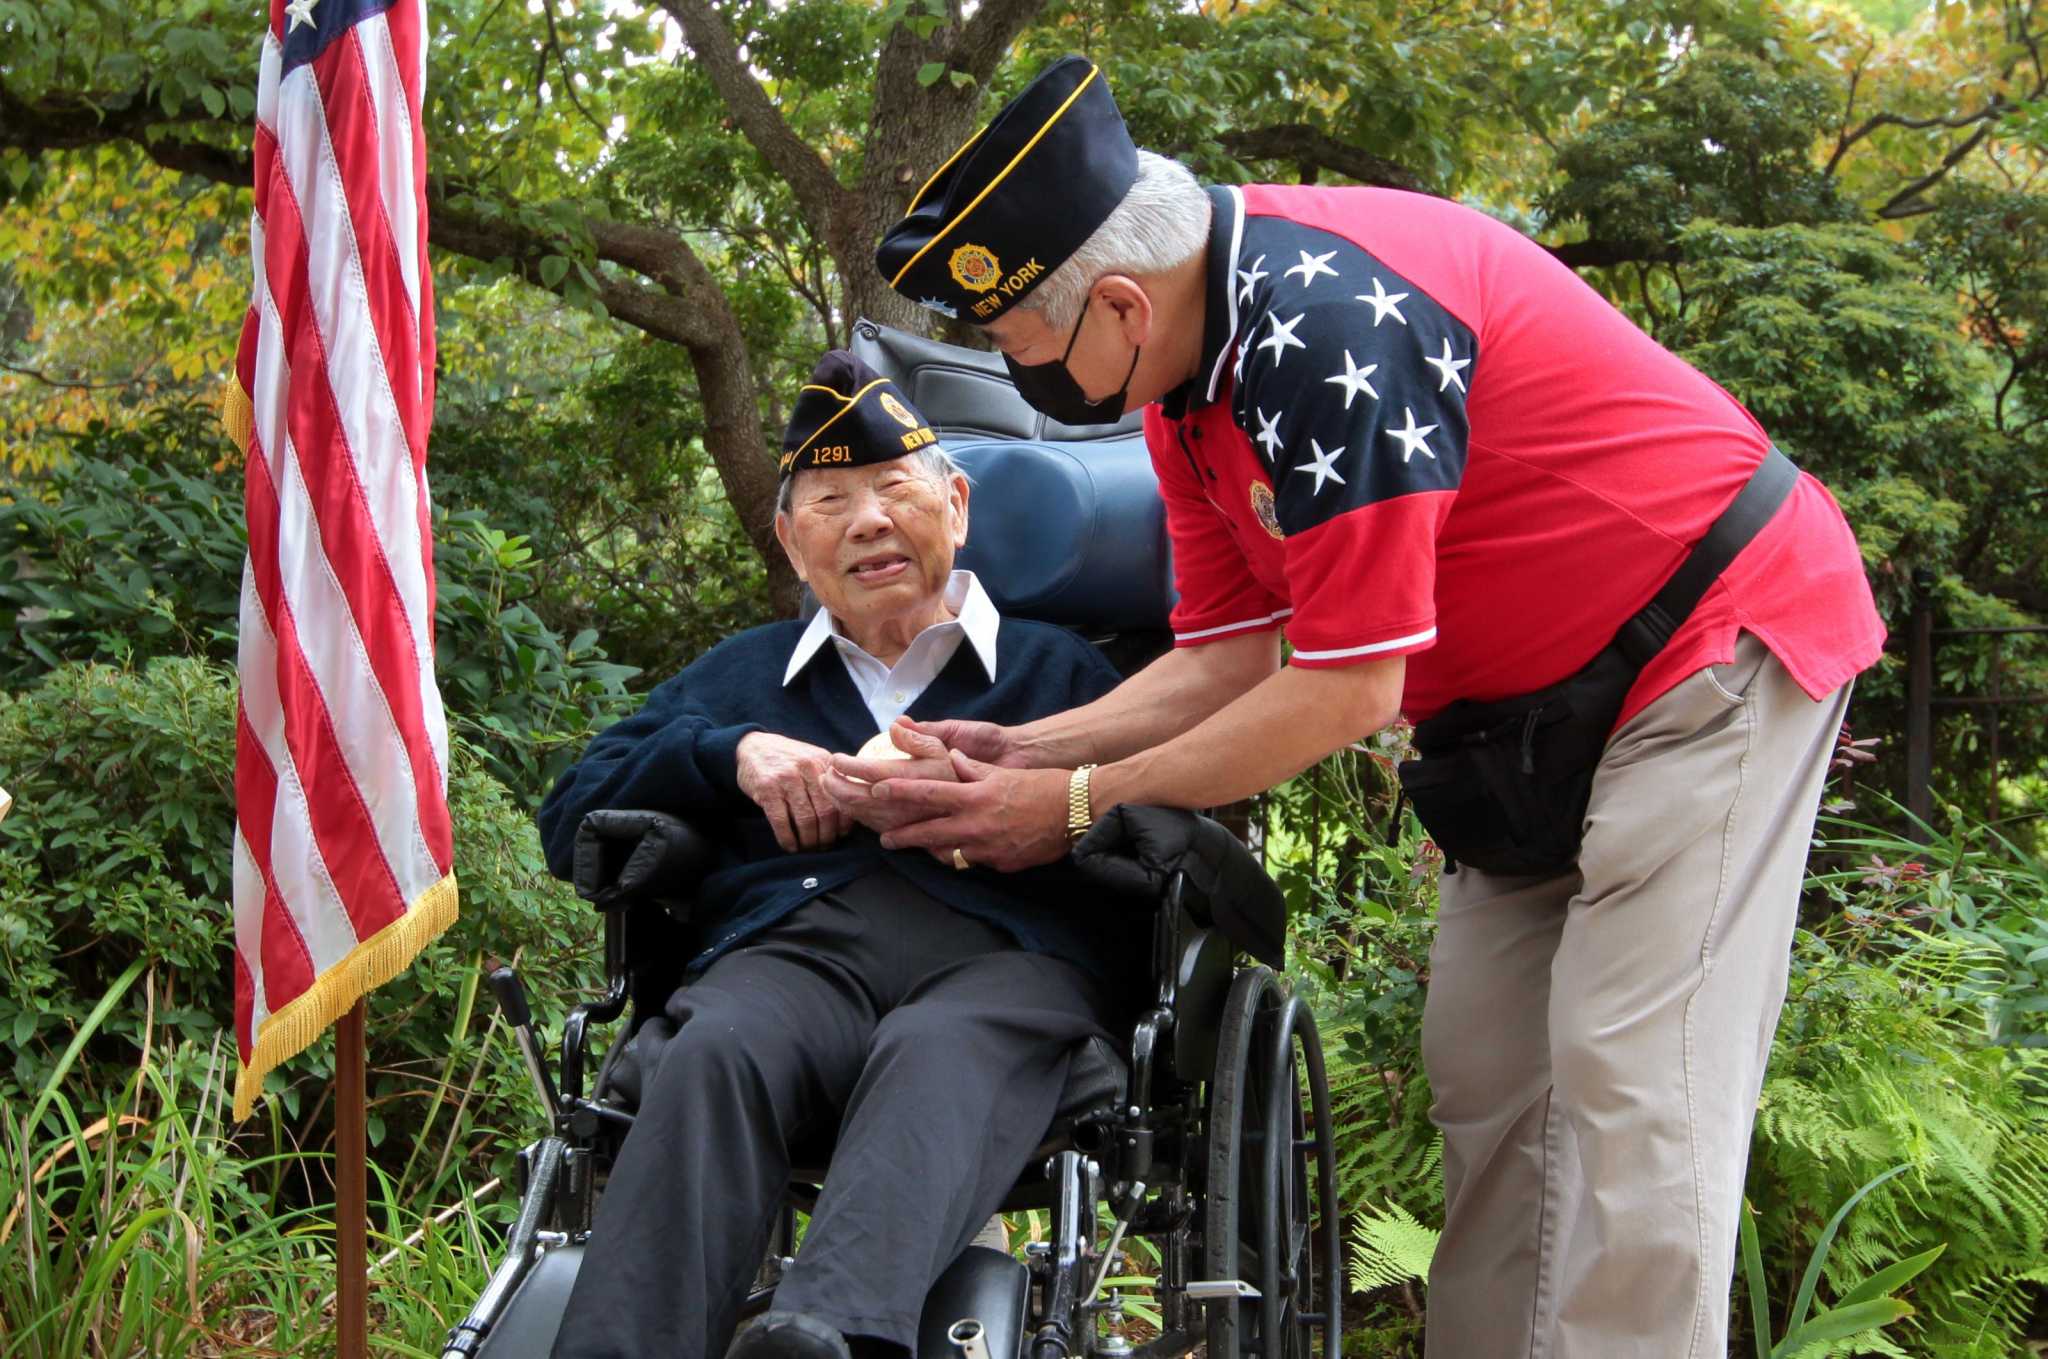 www.greenwichtime.com: Chinese-American veteran in Greenwich honored for World War II service 'on behalf of a grateful nation'